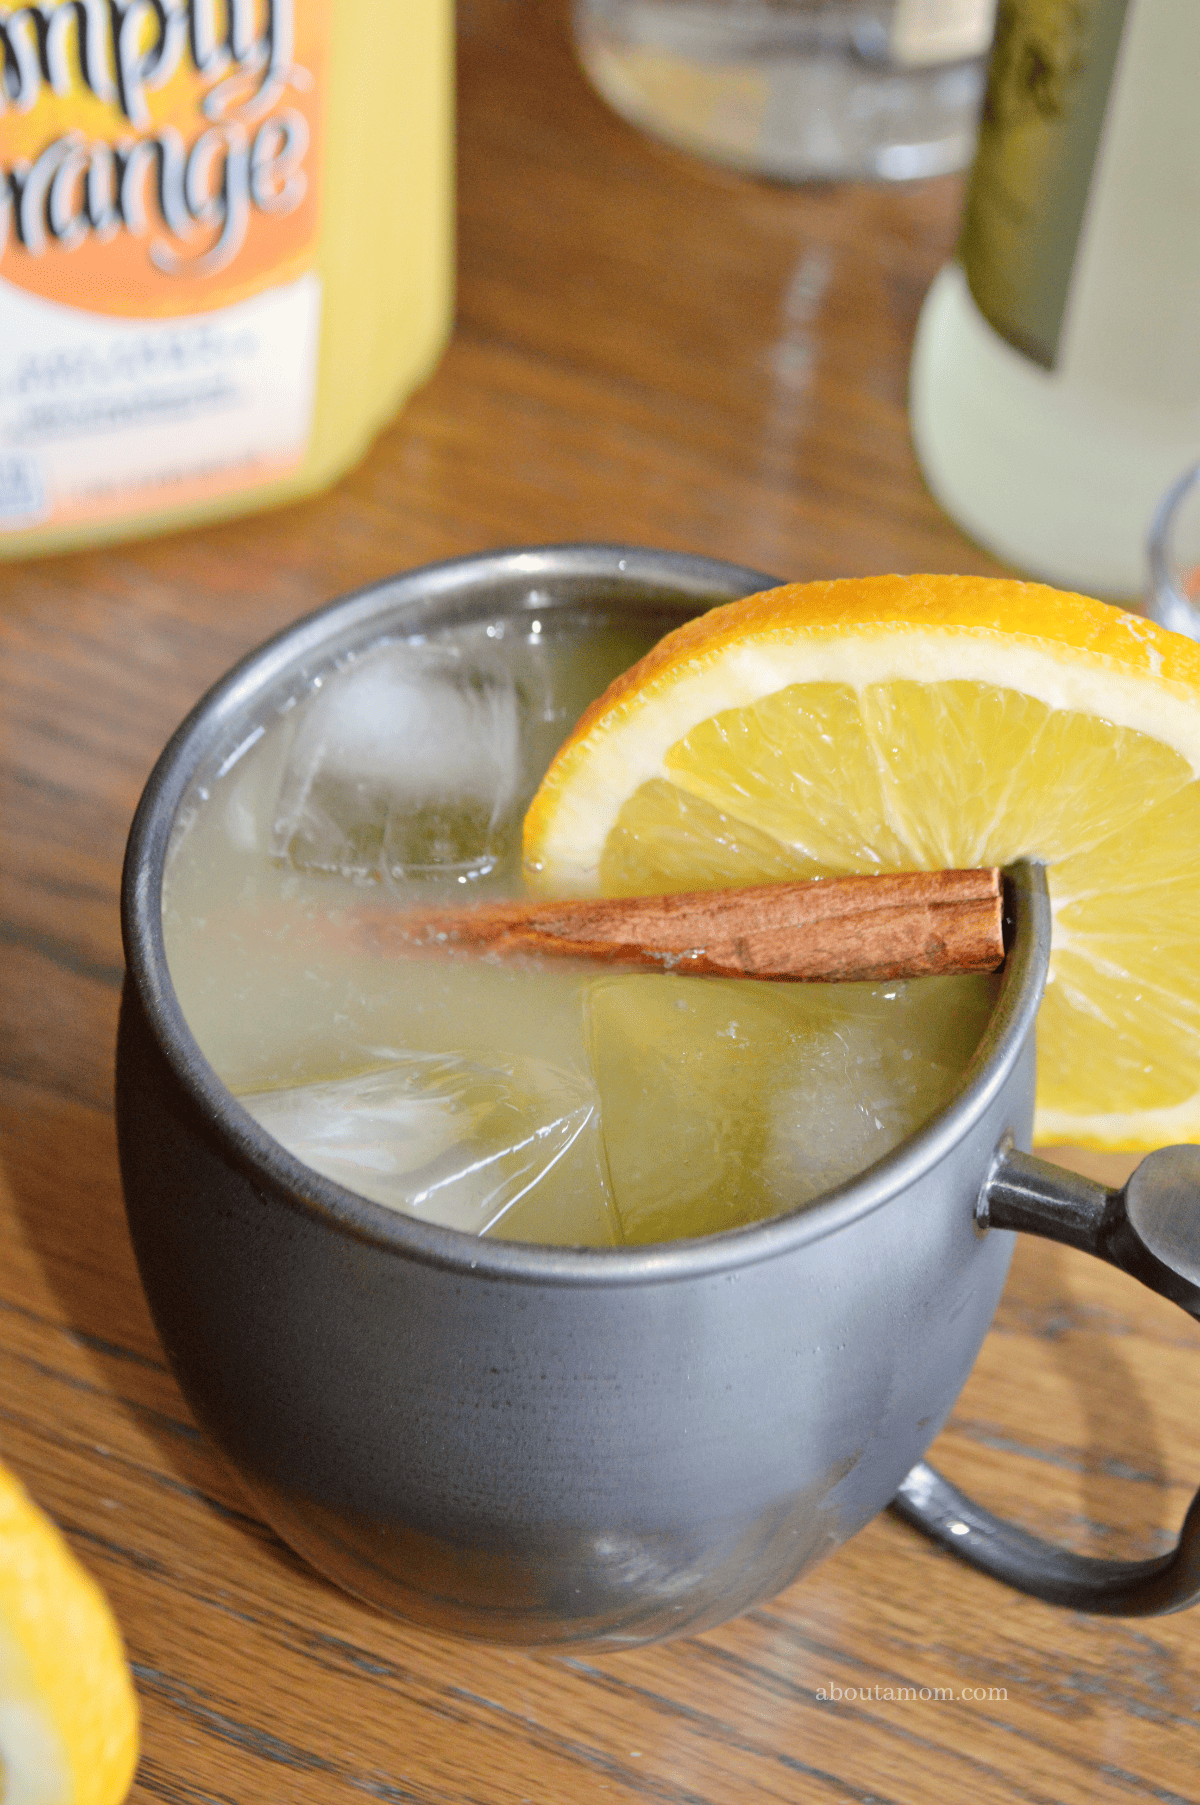 This Spiced Orange Moscow Mule cocktail is the perfect, festive cocktail for your holiday gatherings. The delicious holiday drink comes together easily and is made with orange juice, vodka, ginger beer and a simple syrup spiced with whole cloves and cinnamon sticks.